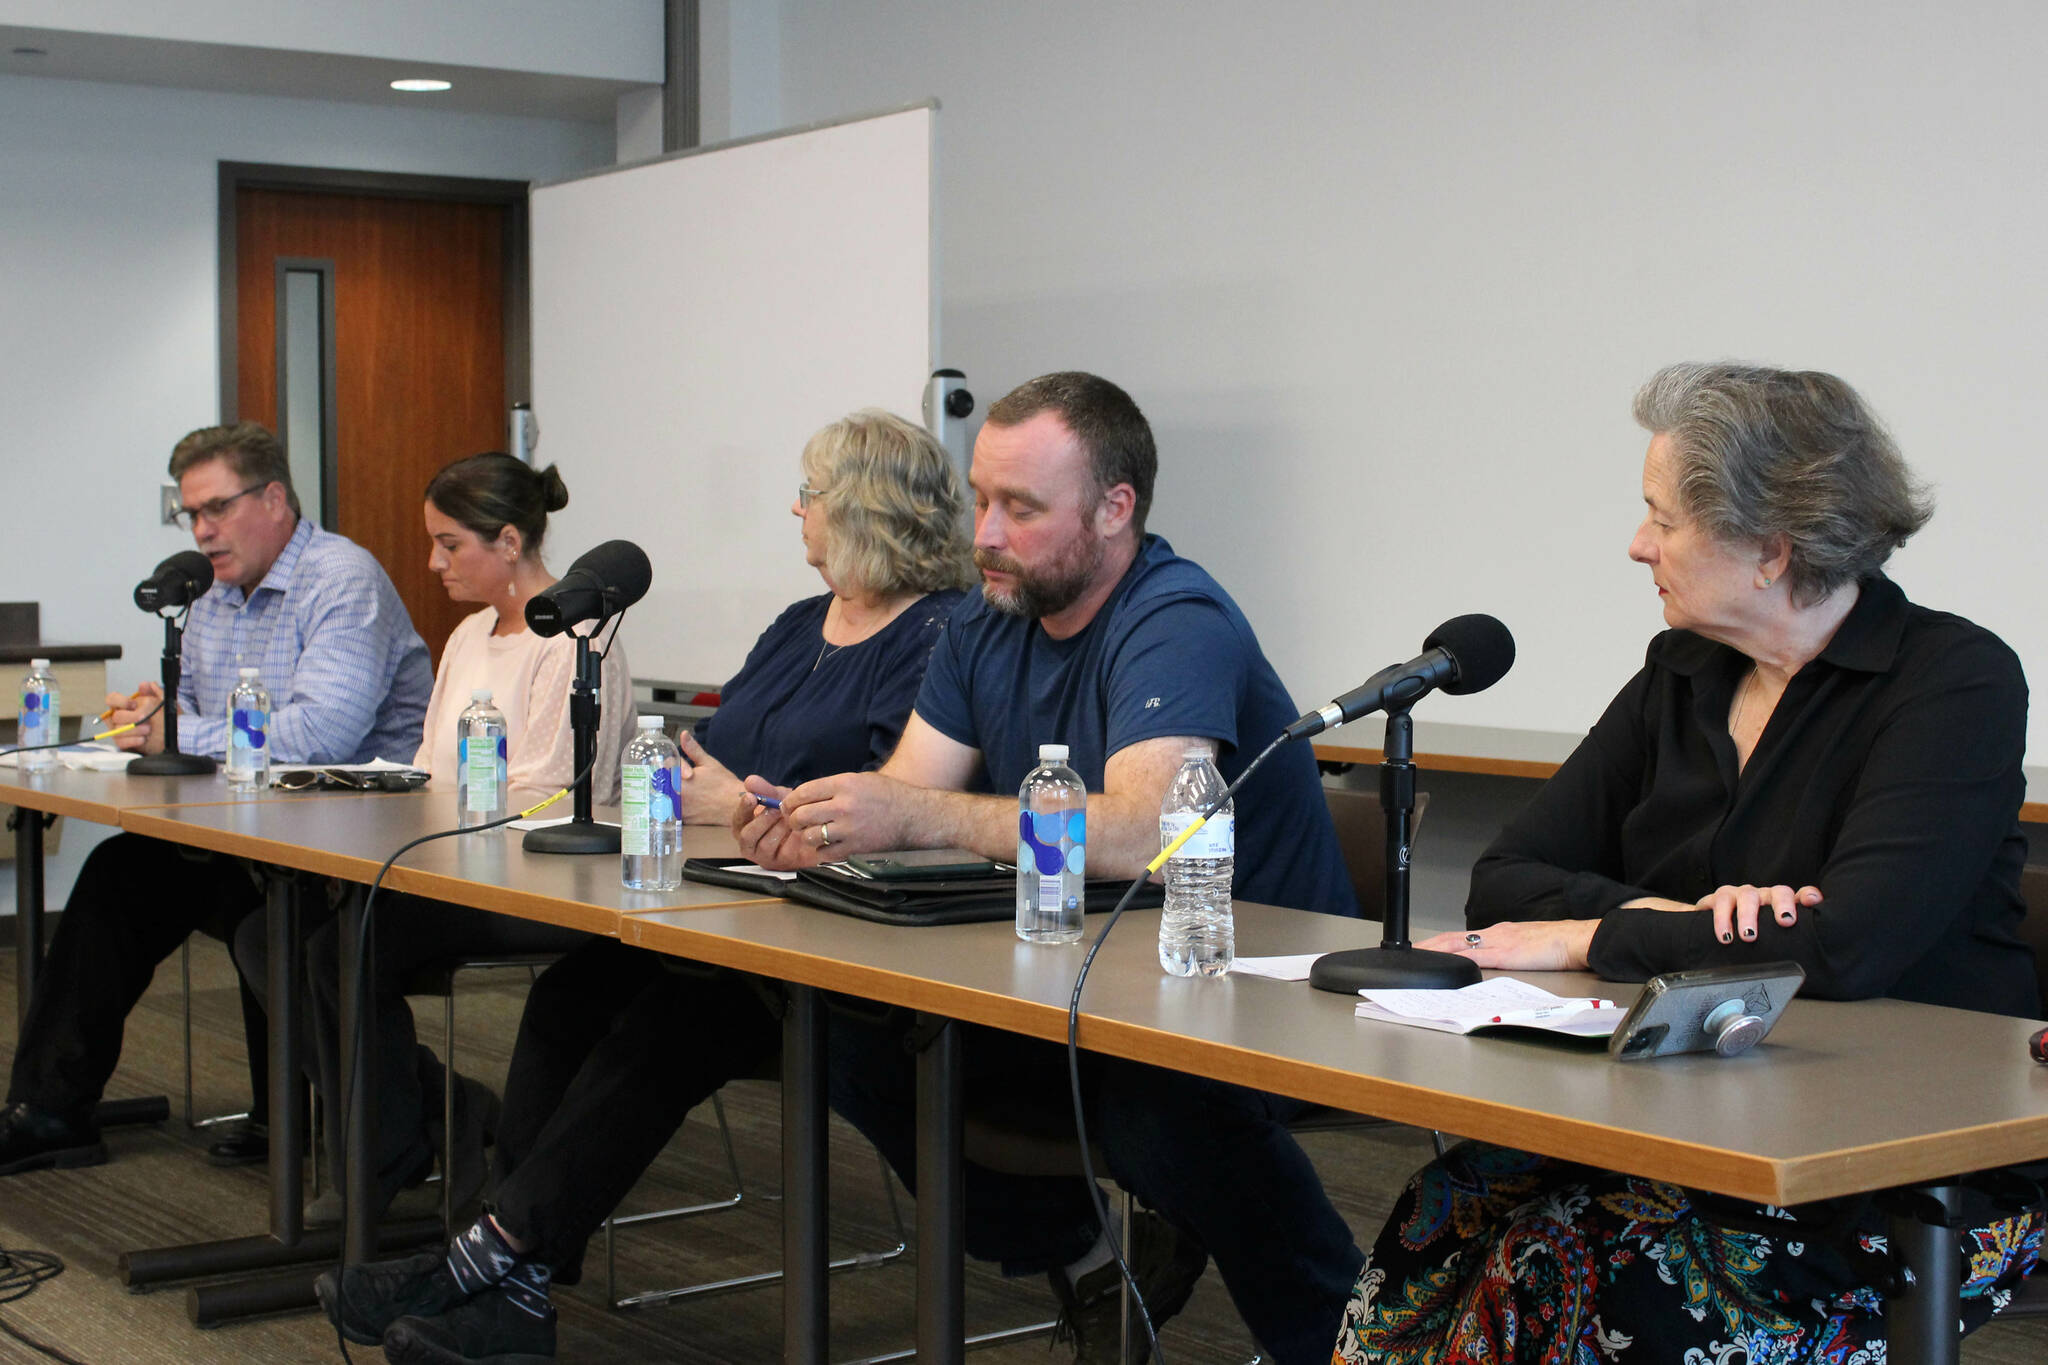 From left, Kenai city mayoral candidates Brian Gabriel and Teea Winger, as well as council candidates Victoria Askin, Alex Douthit and Glenese Pettey participate in a candidate forum at the Soldotna Public Library on Monday, Aug. 29, 2022, in Soldotna, Alaska. The Peninsula Clarion and KDLL 91.9 FM, in partnership with the Central Kenai Peninsula League of Women Voters are hosting a series of election forums Mondays from 6-7 p.m. through Oct. 31 at the Soldotna library. (Ashlyn O’Hara/Peninsula Clarion)